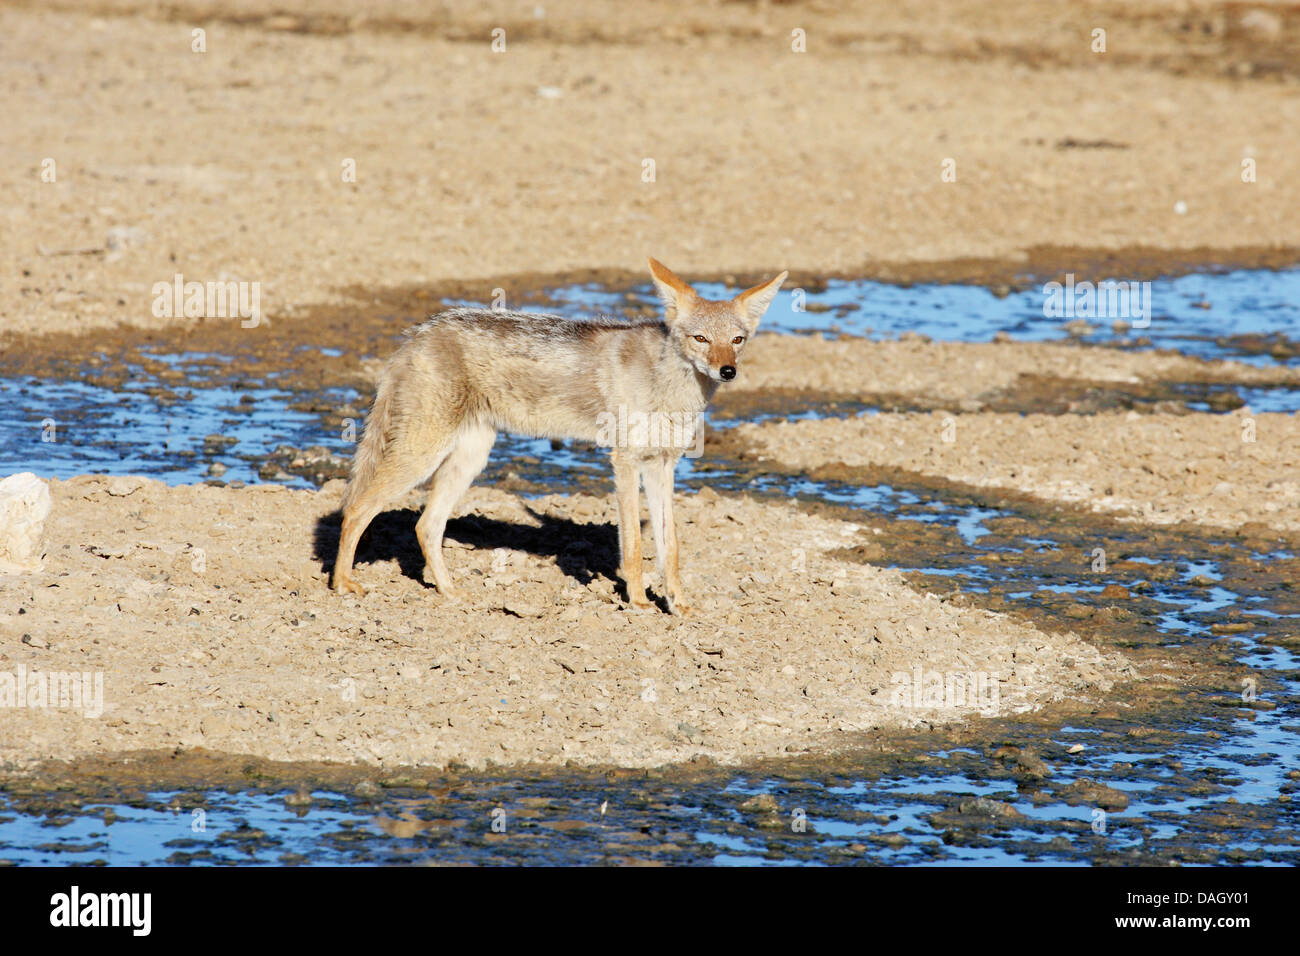 black-backed jackal (Canis mesomelas), standing at a watercourse running dry, South Africa, Kgalagadi Transfrontier National Park Stock Photo